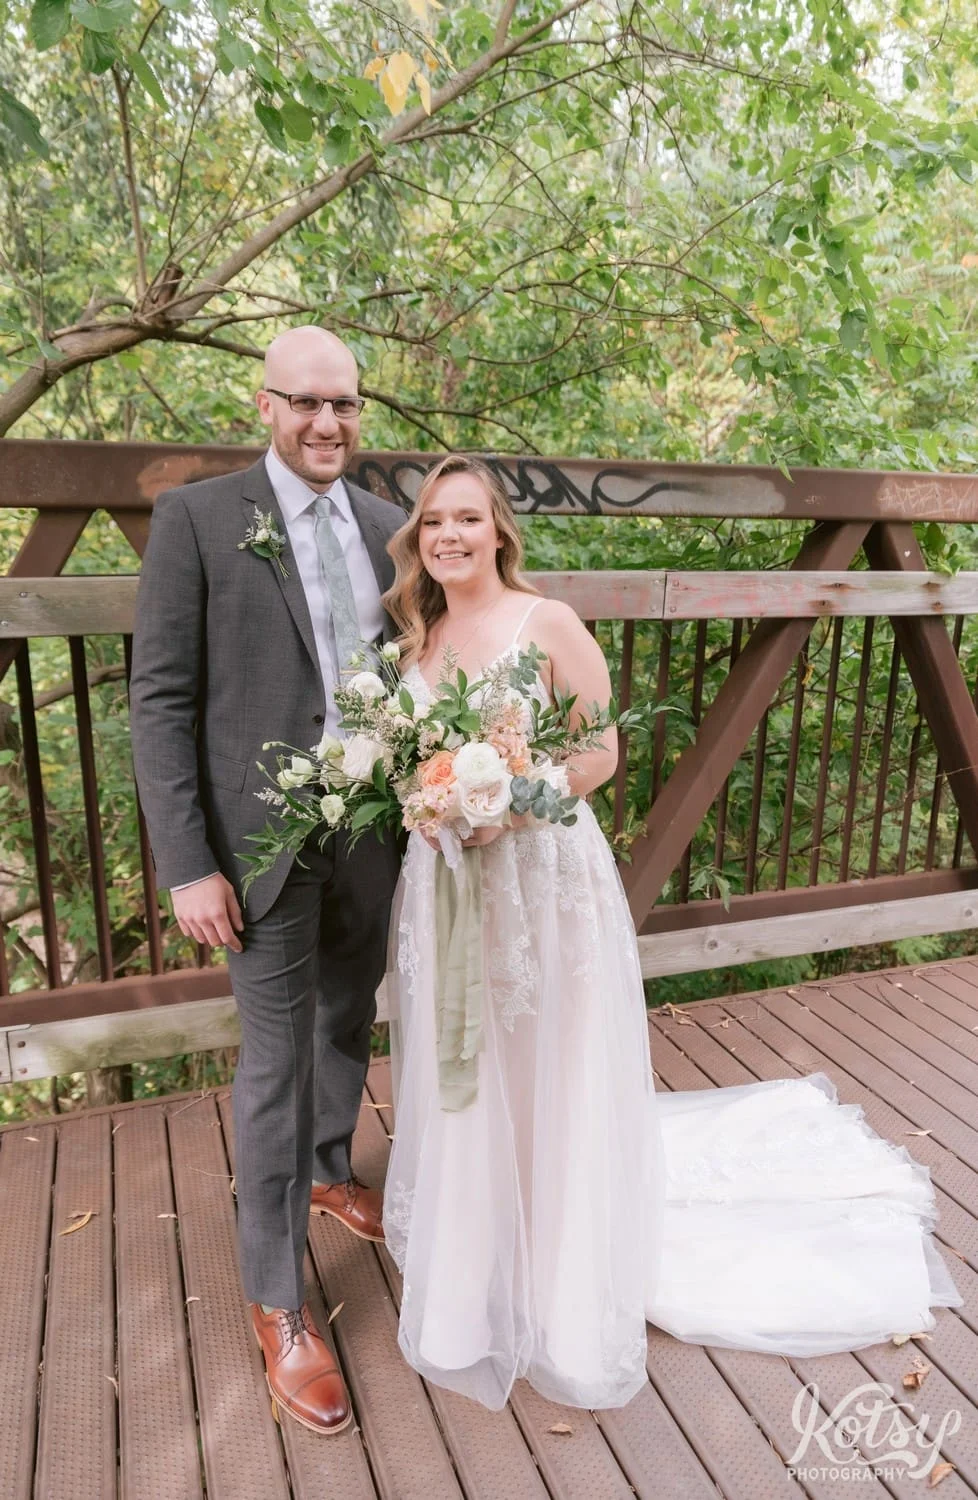 A bride wearing a white bridal gown, holding a flower bouquet and a groom wearing a Gray suit pose for a photo on a bridge during their first look at West Deane Park in Toronto, Canada